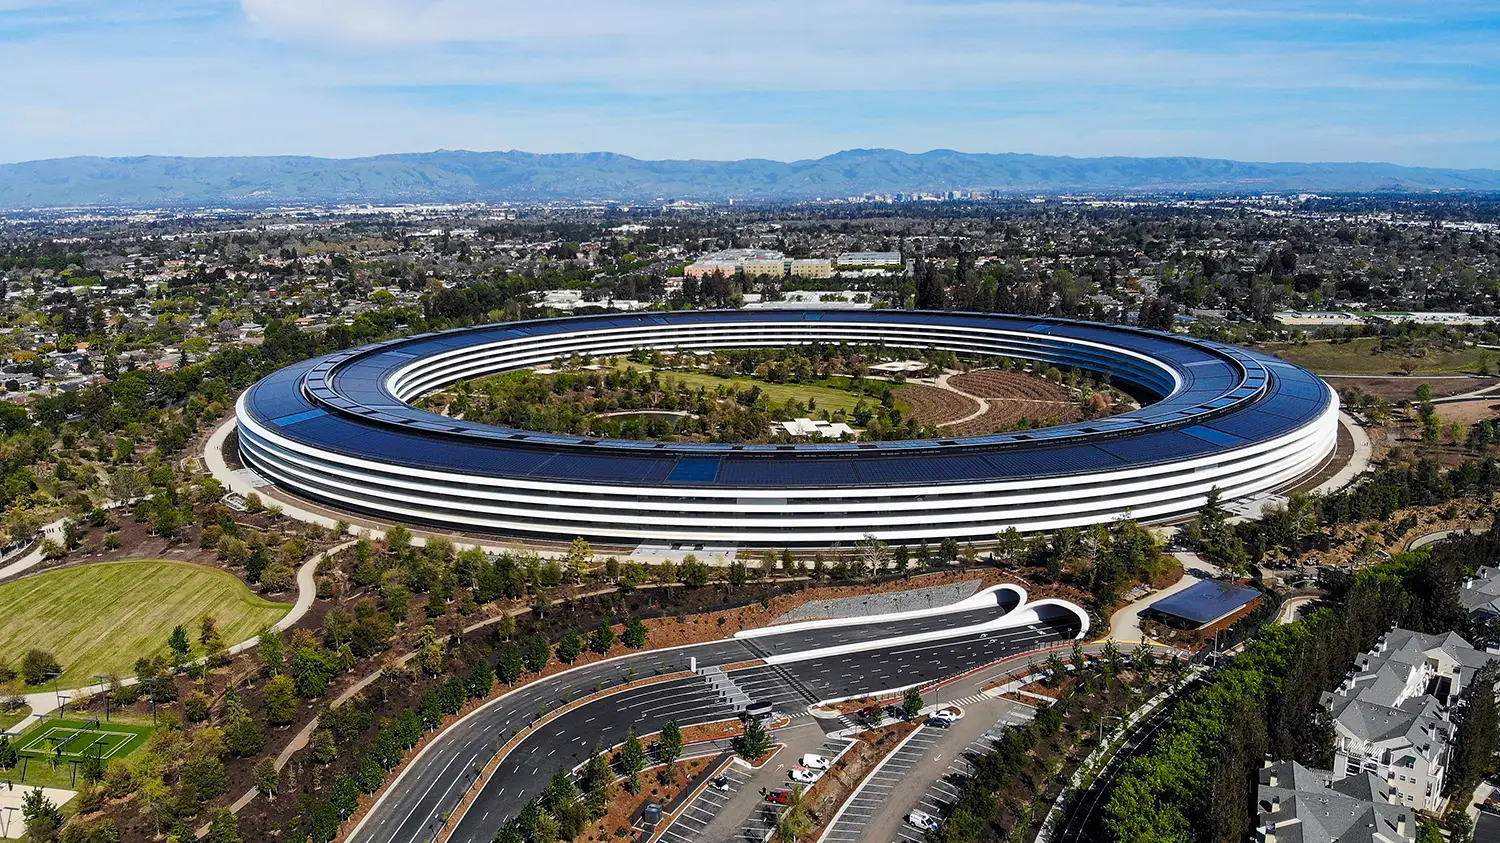 The Apple campus in the center of the Silicon Valley, close to Milpitas, CA.